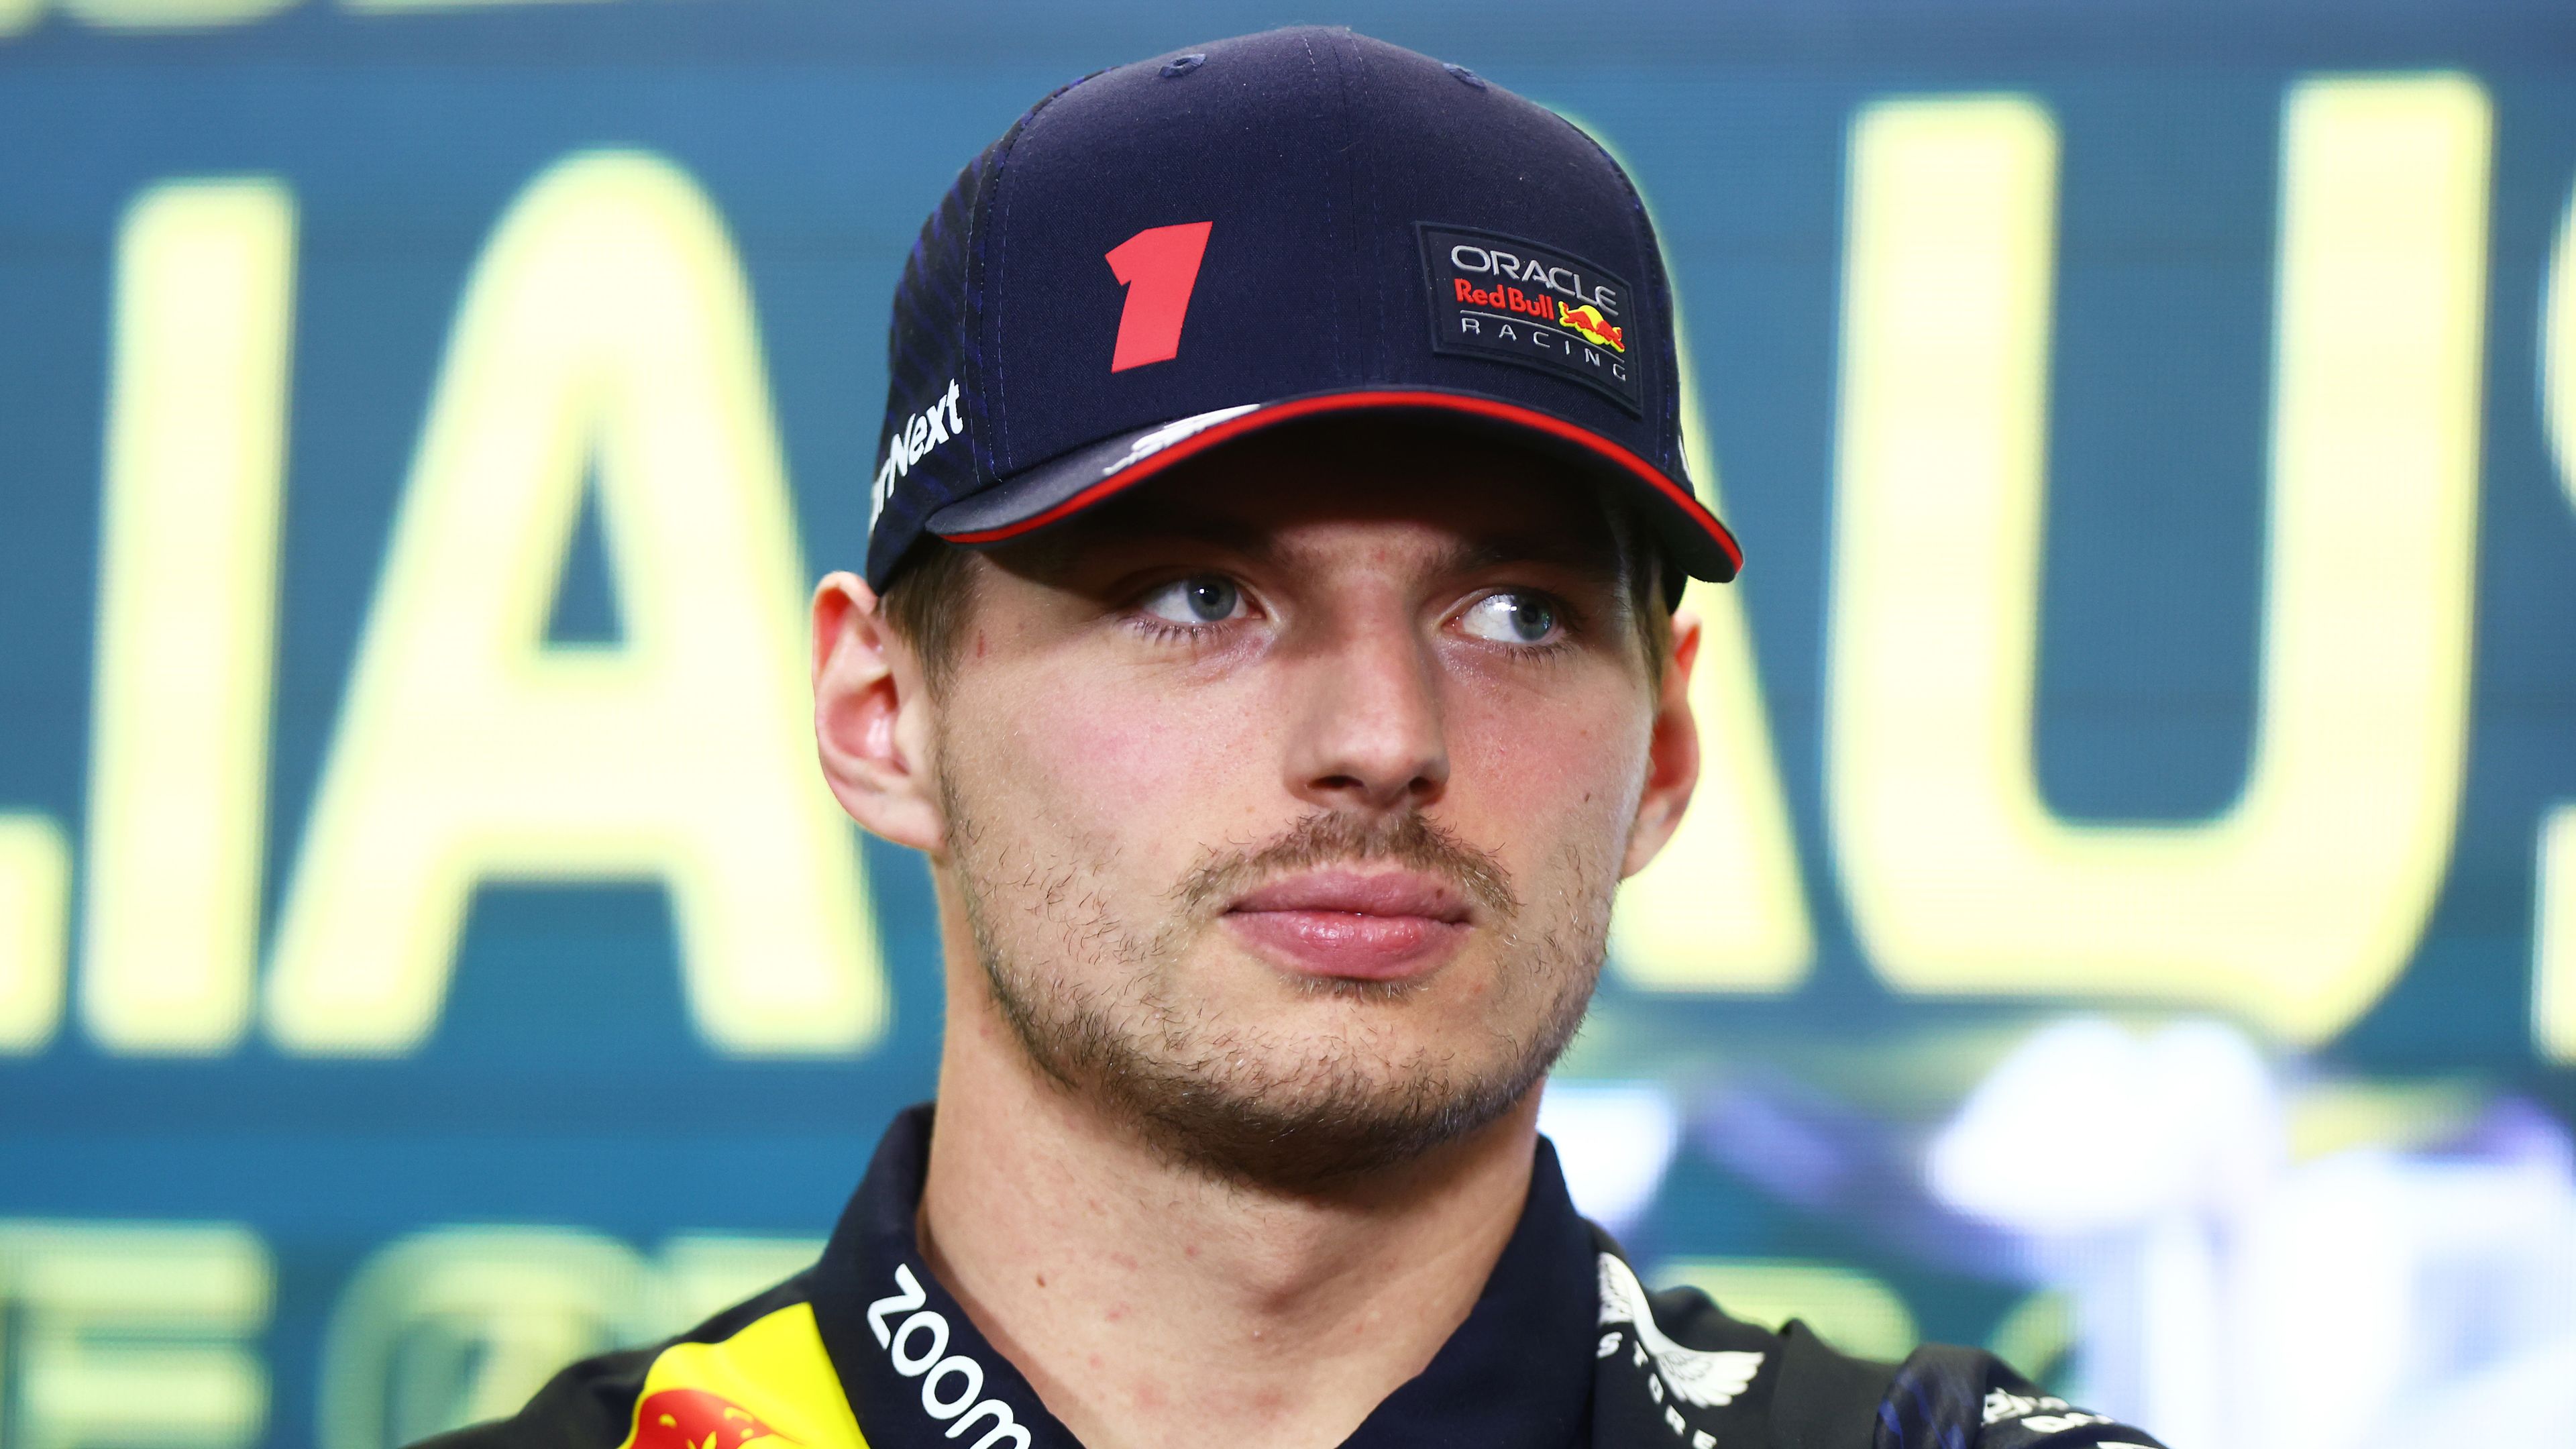 Max Verstappen has hinted his current contract with Red Bull could be his last.